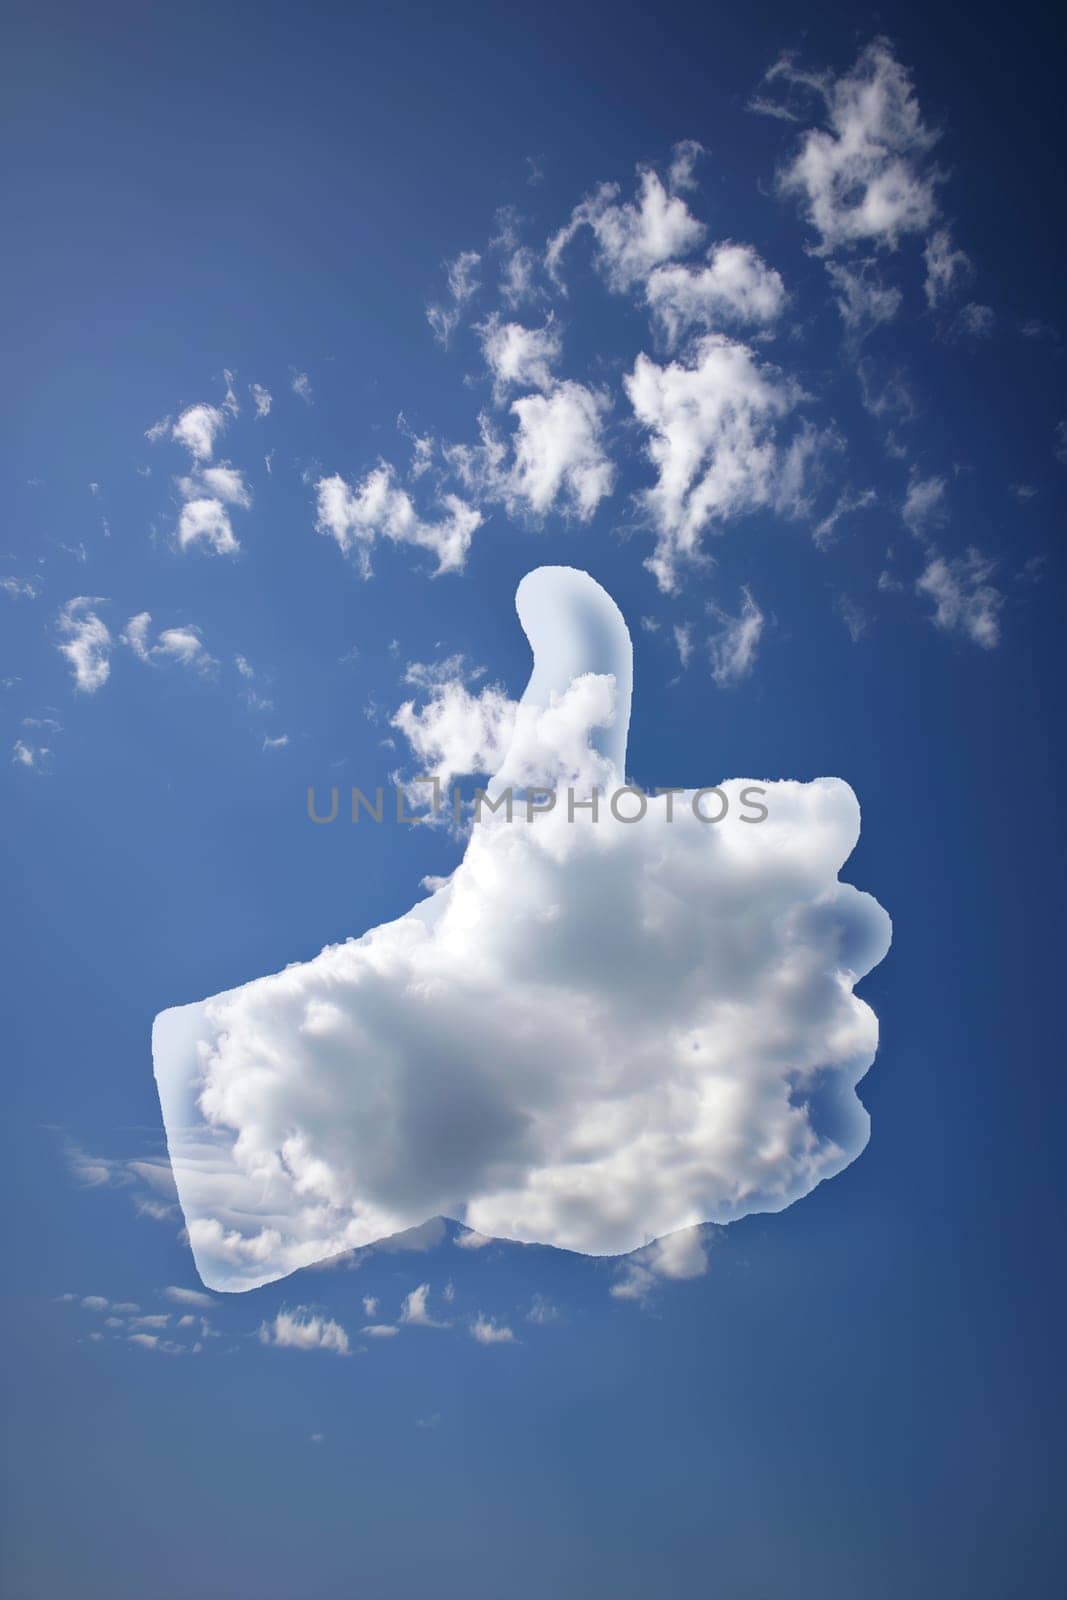 A hand forming a thumbs up sign against a clear blue sky background.